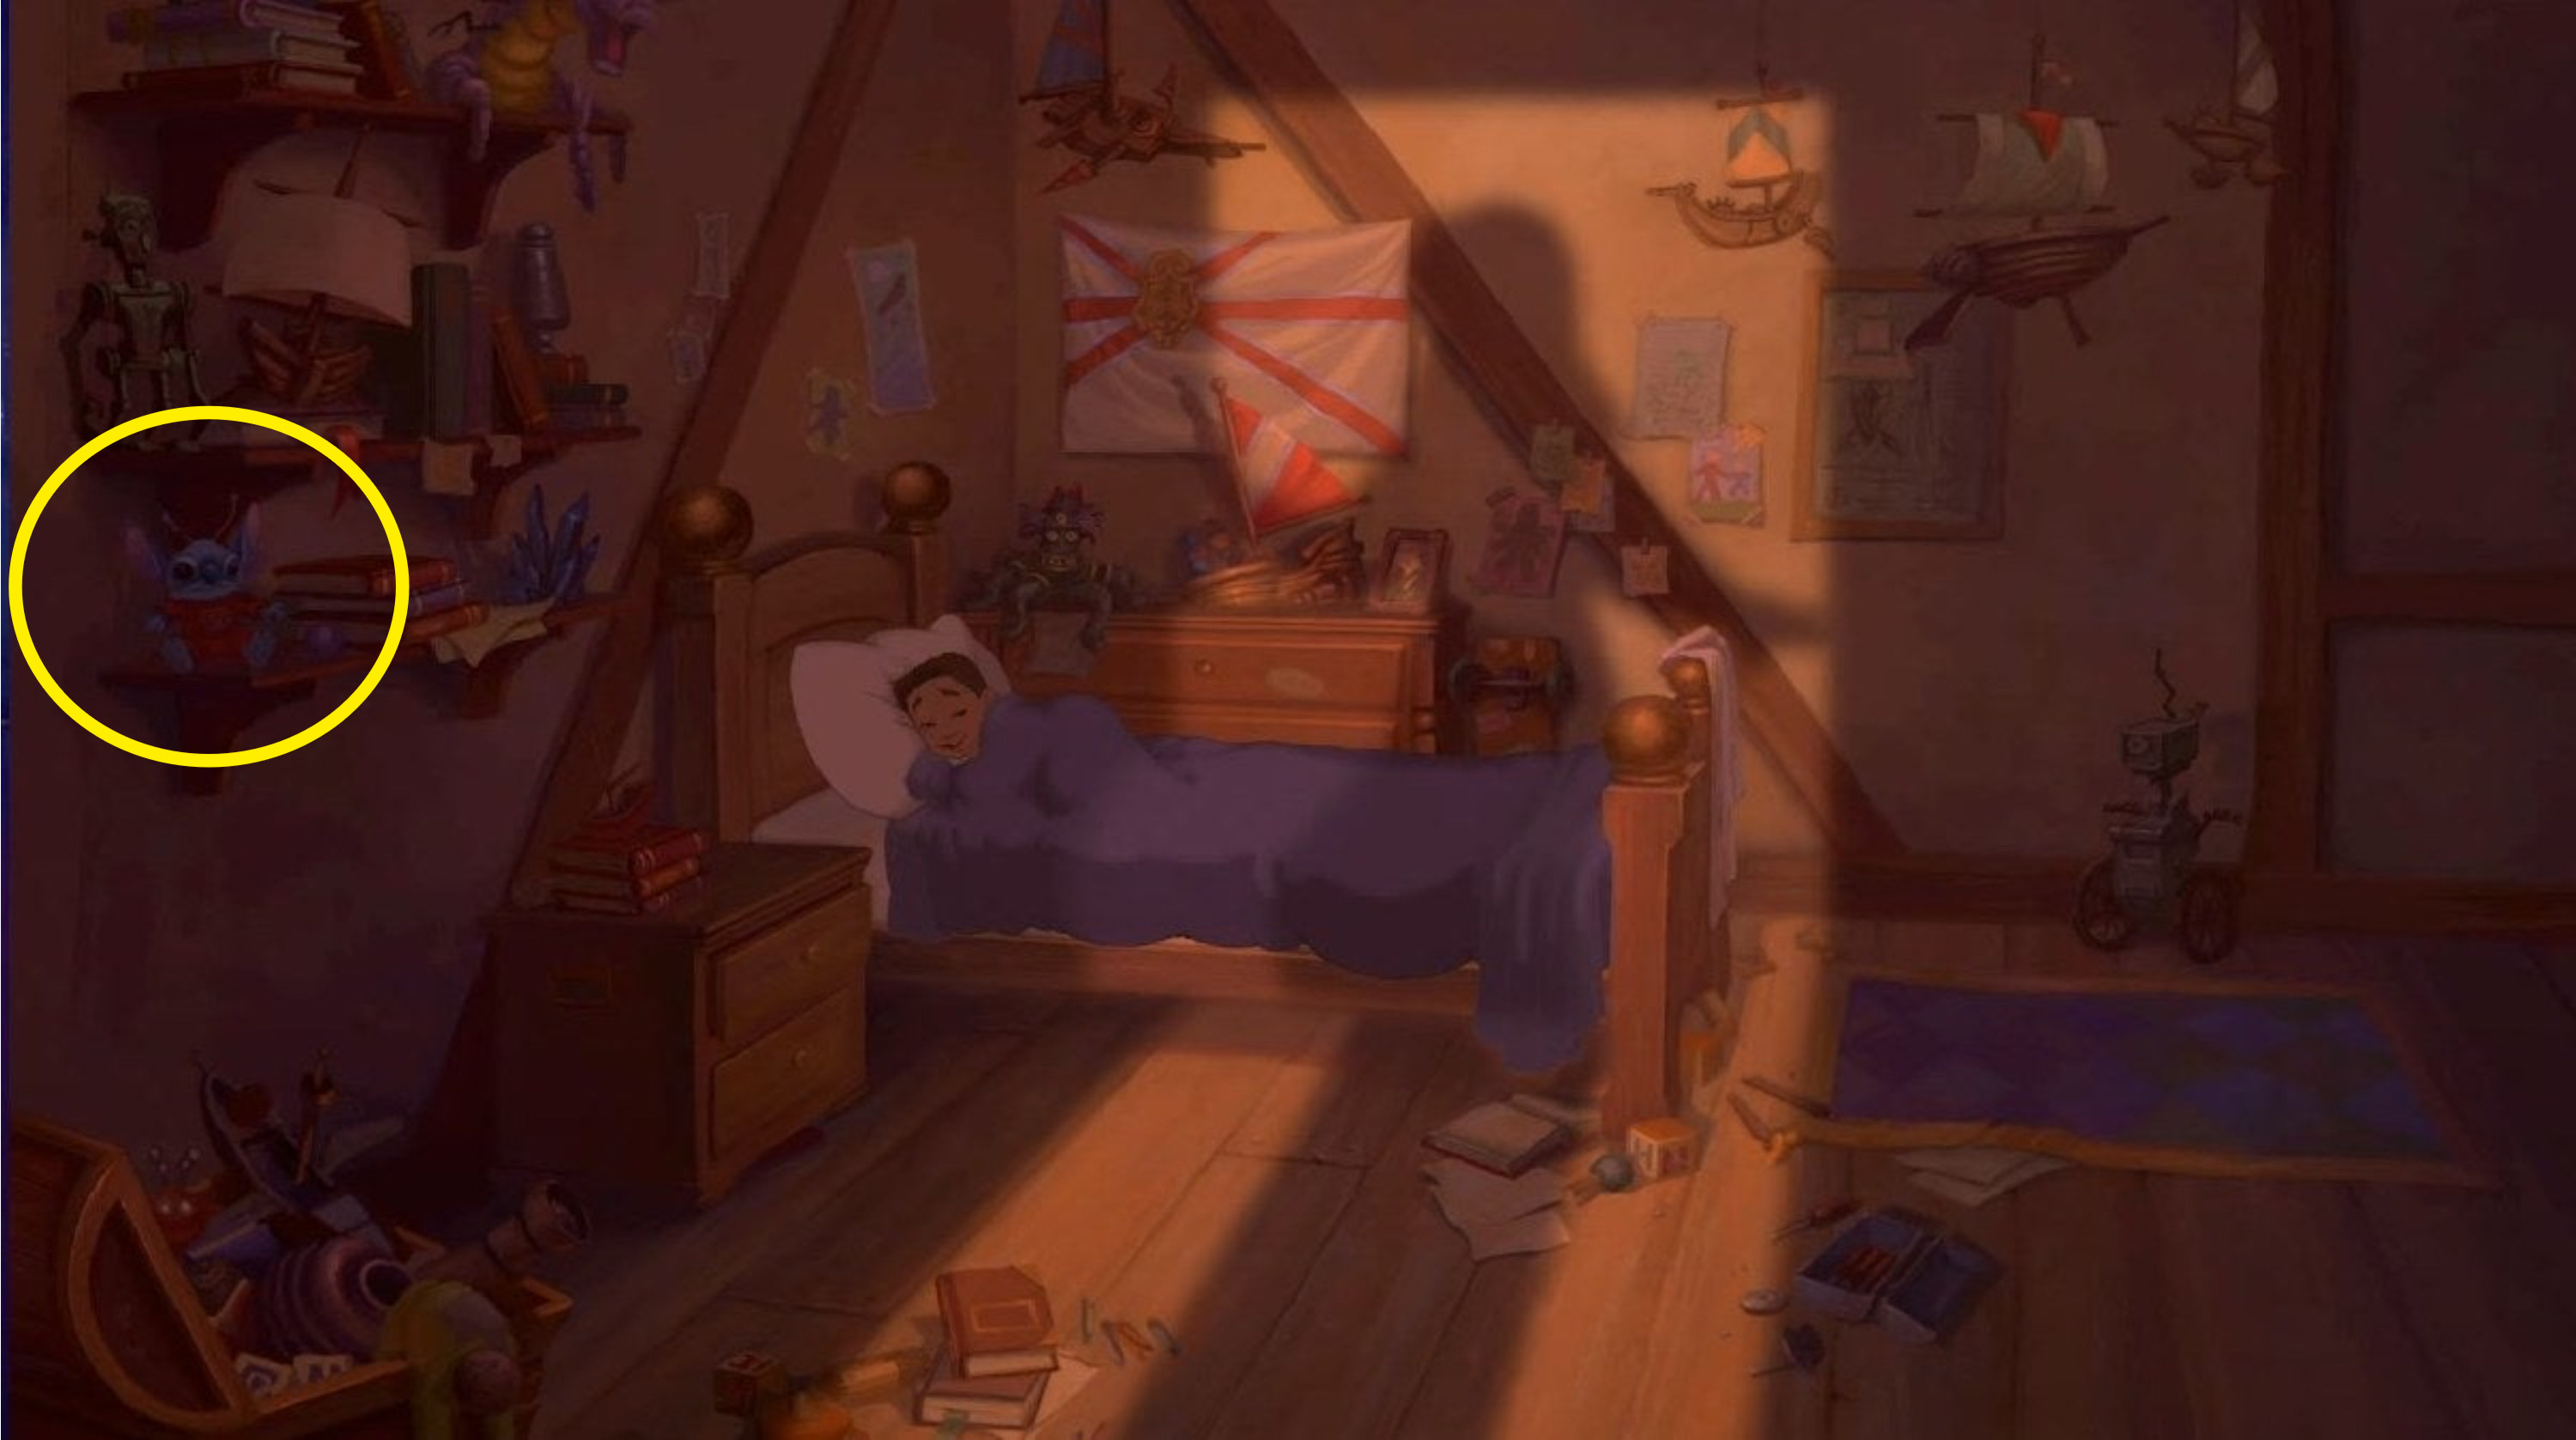 As Jim Hawkins tells his mother goodnight, a doll of Stitch from Lilo &amp;amp; Stitch can be seen on the shelf